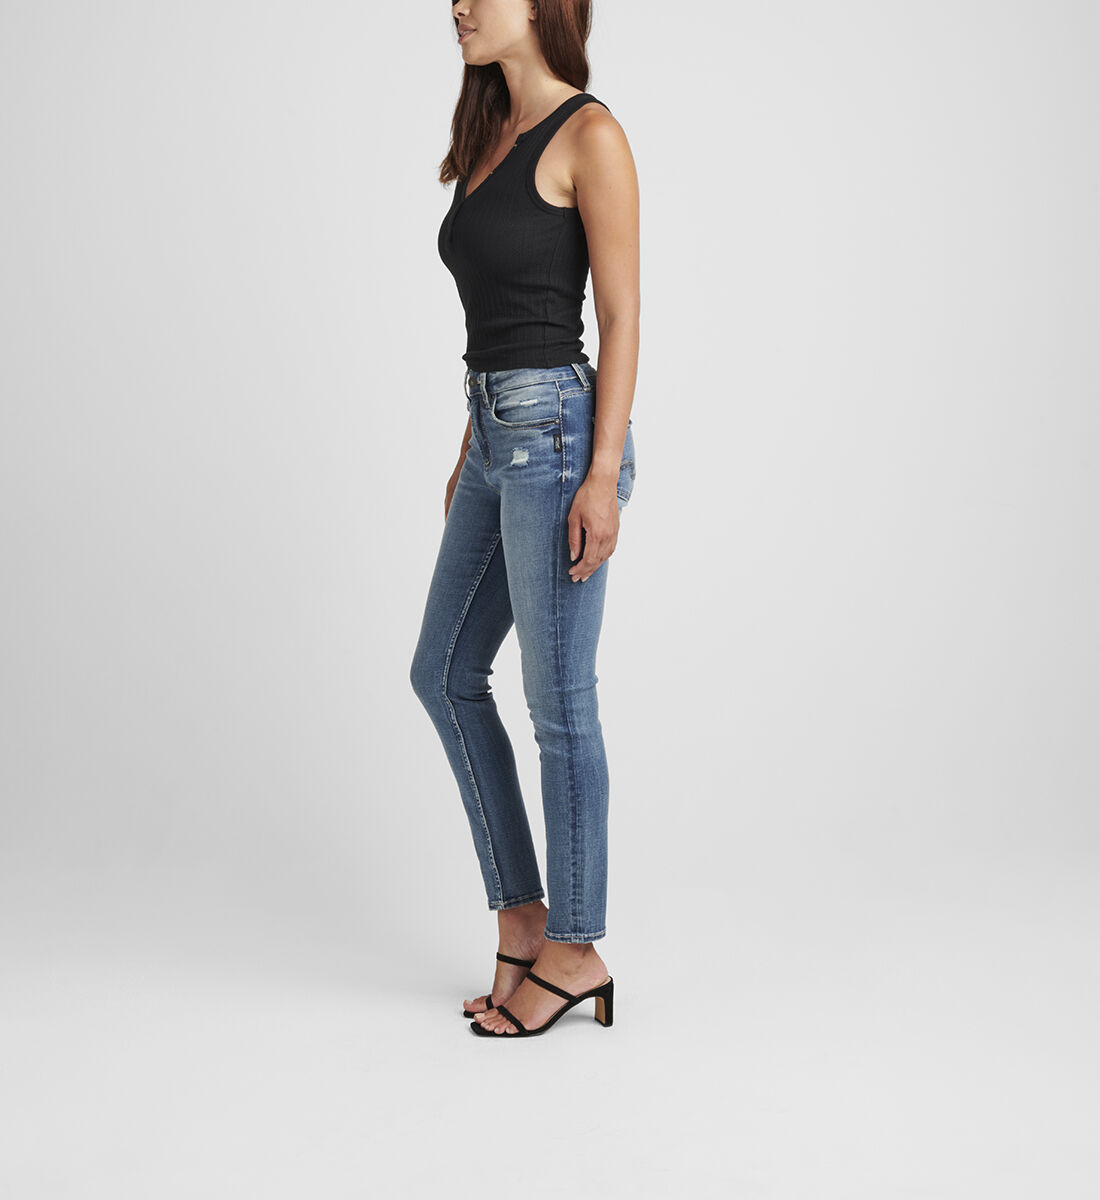 Avery High Rise Skinny Jeans Side